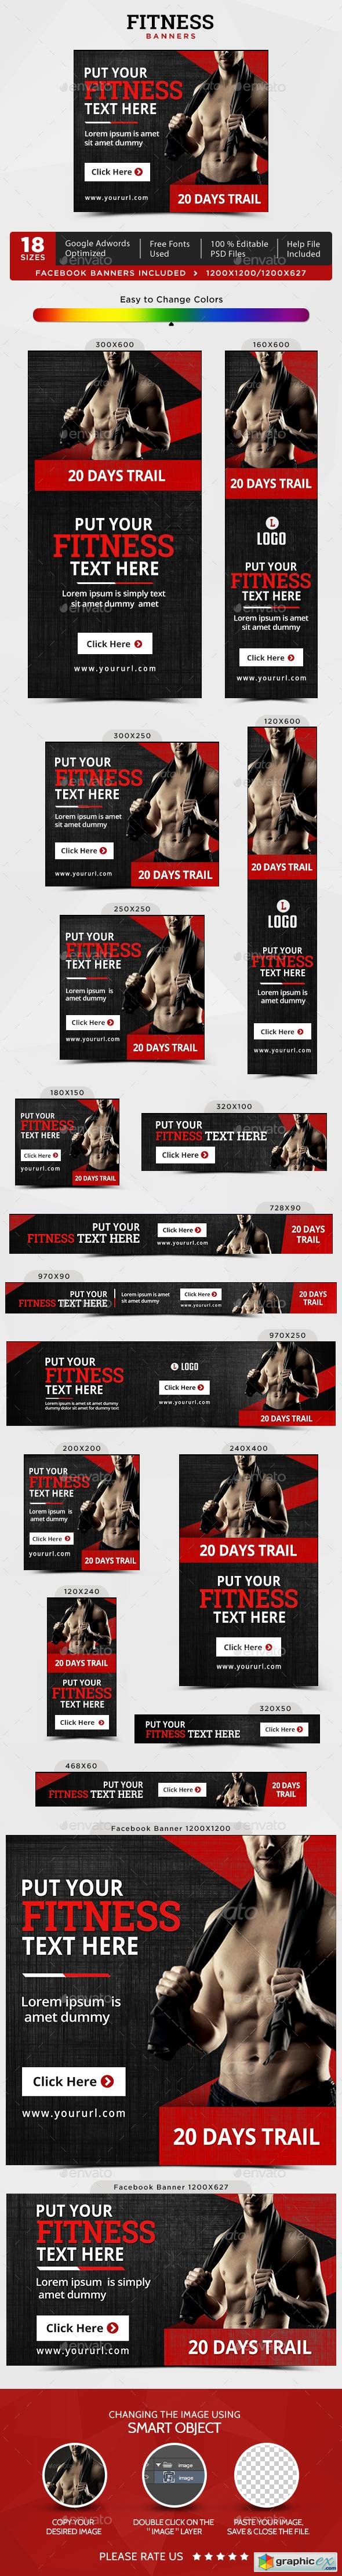 Fitness Banners 17230394